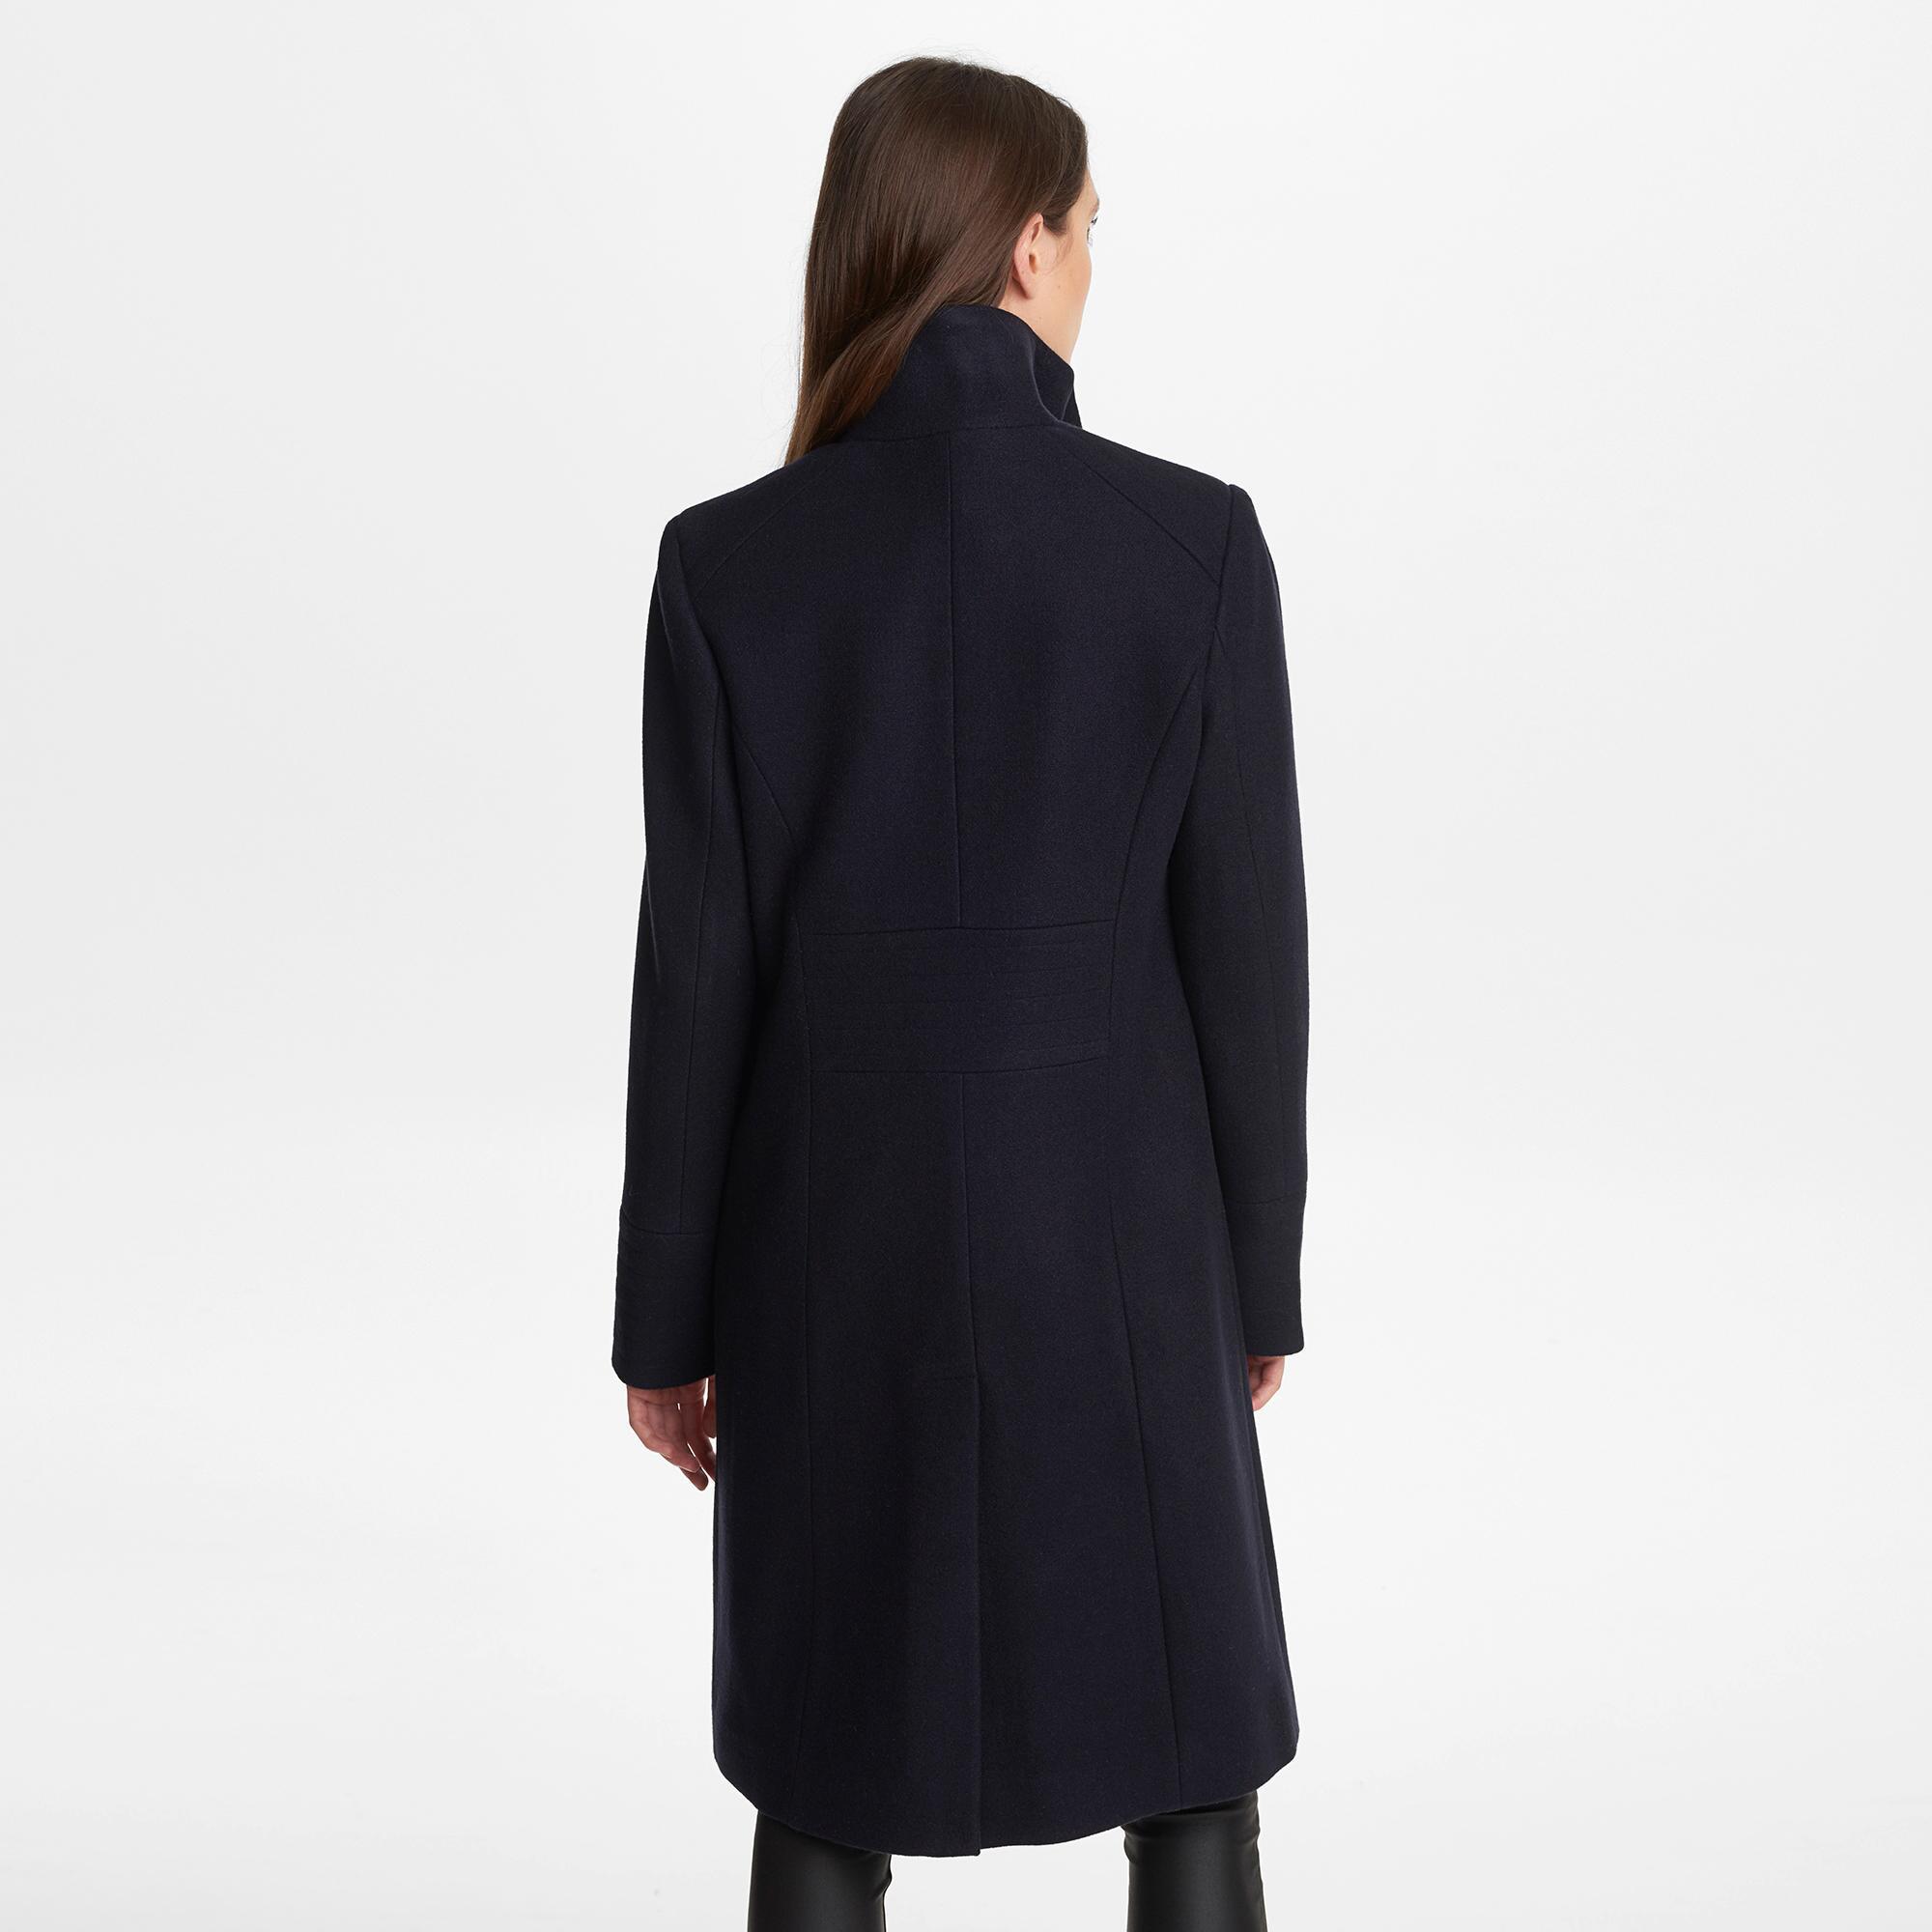 Karl Lagerfeld Synthetic Officer Placket Front Coat in Navy (Blue) - Lyst